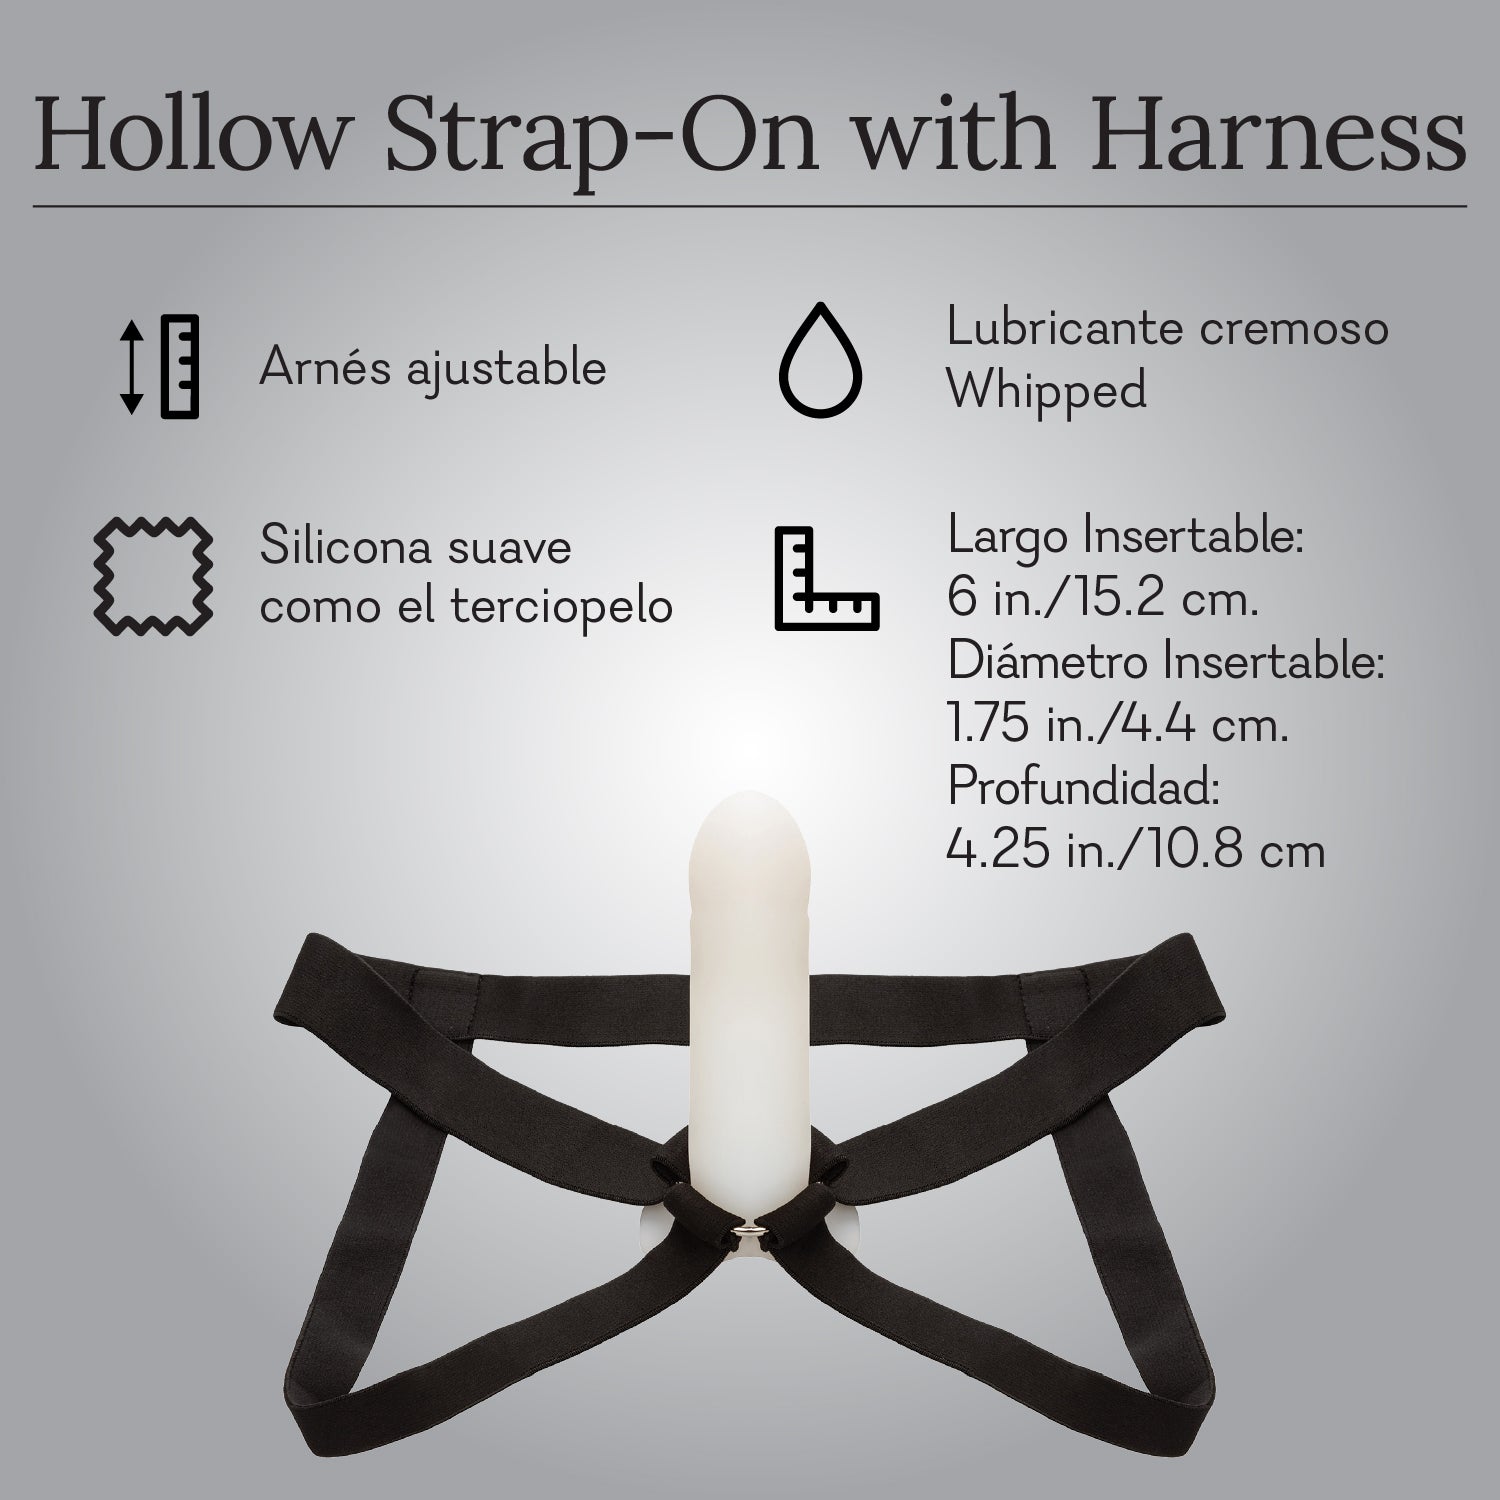 Hollow Strap-On with Harness Infographic Spanish 2 Pure Romance